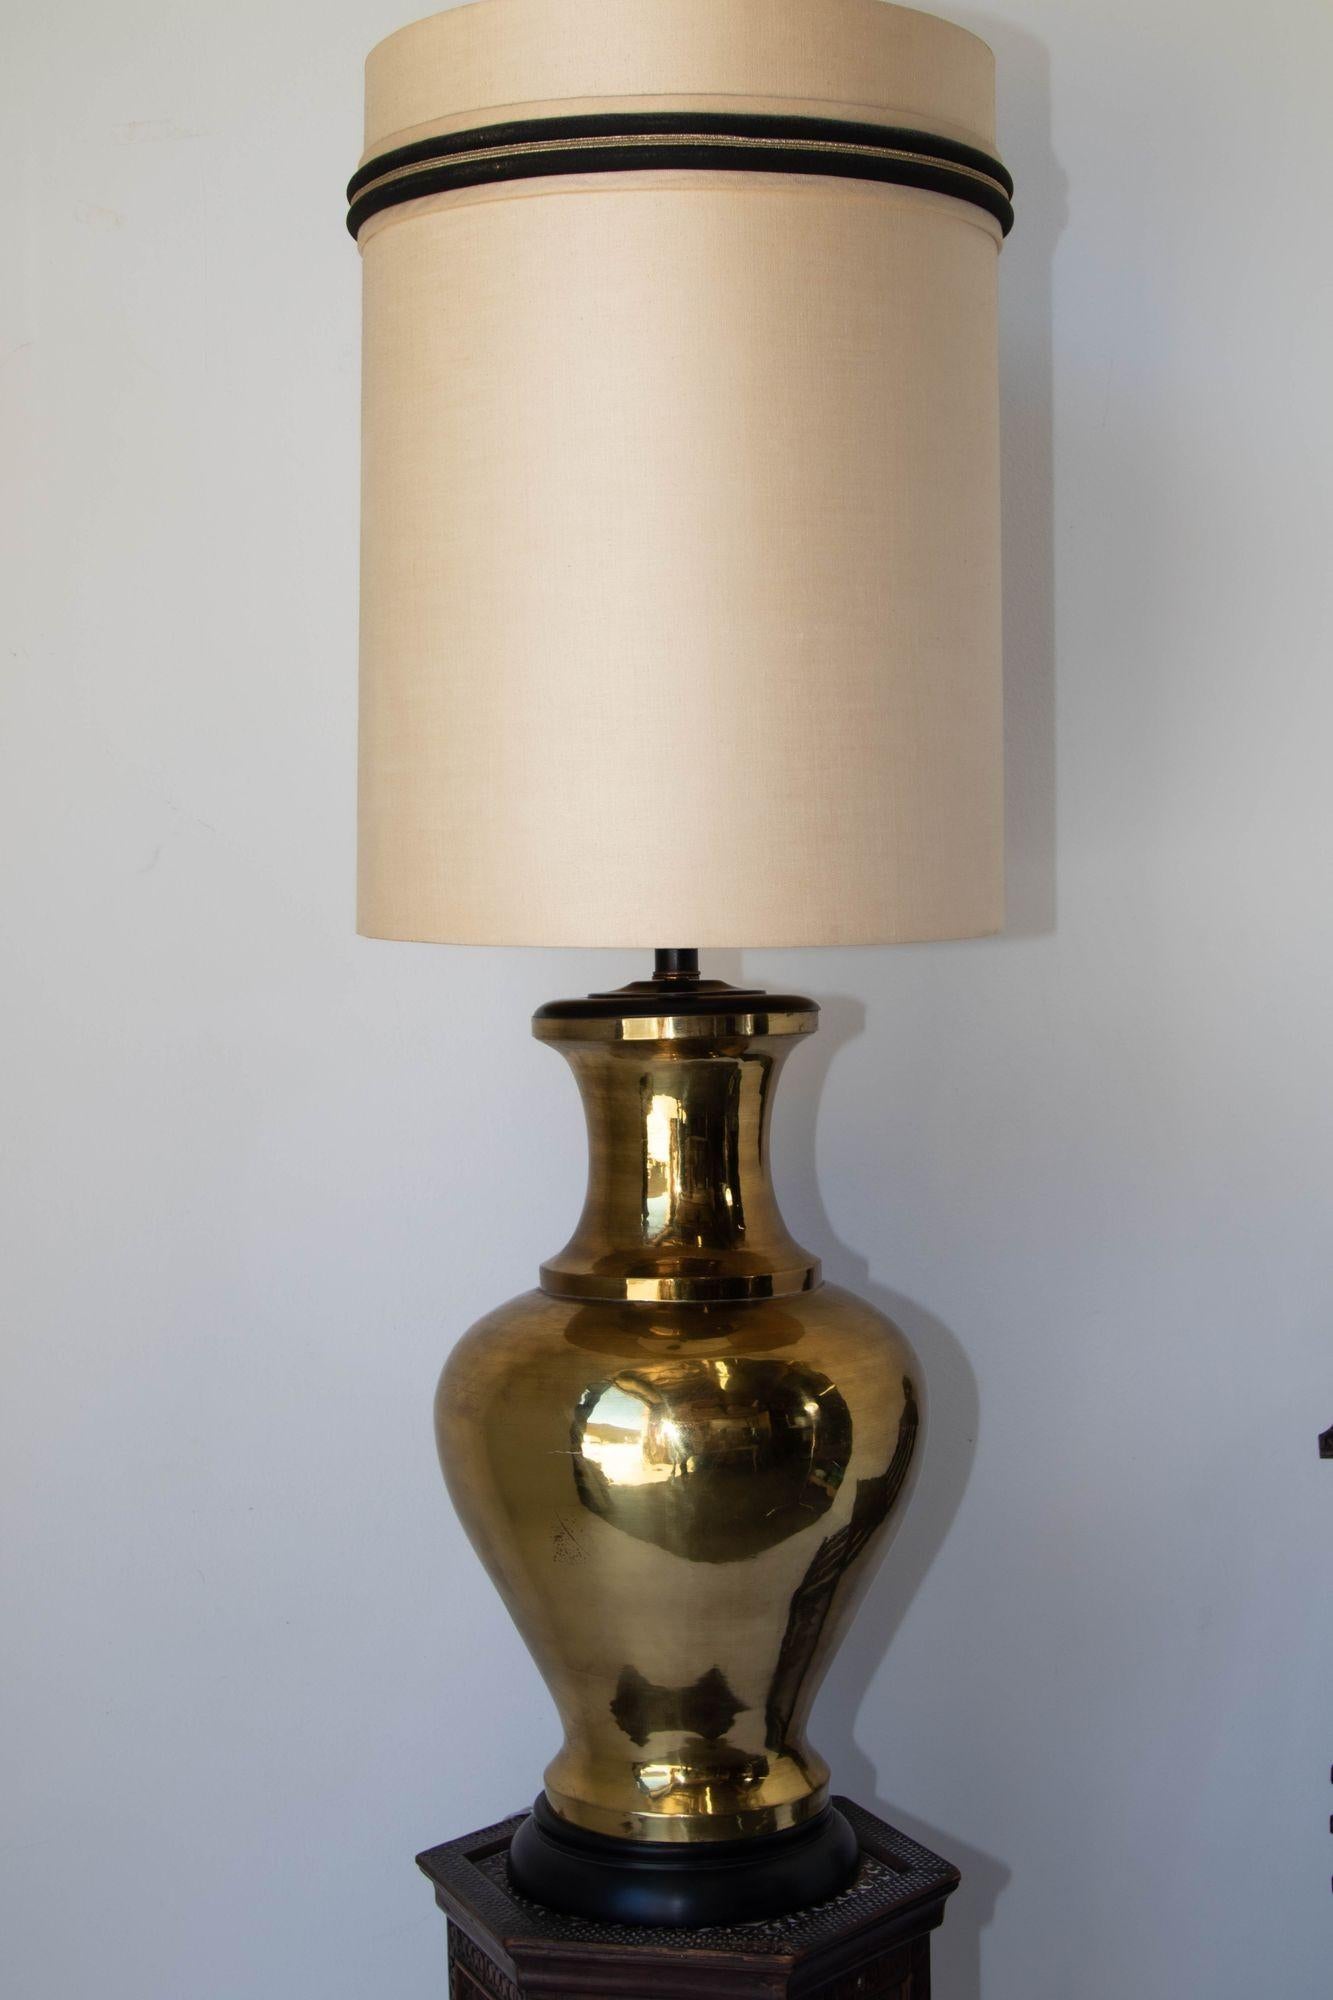 Hand-Crafted Mid-Century Modern Polished Brass Large Scale Chinoiserie Urn Table Lamp, 1950 For Sale